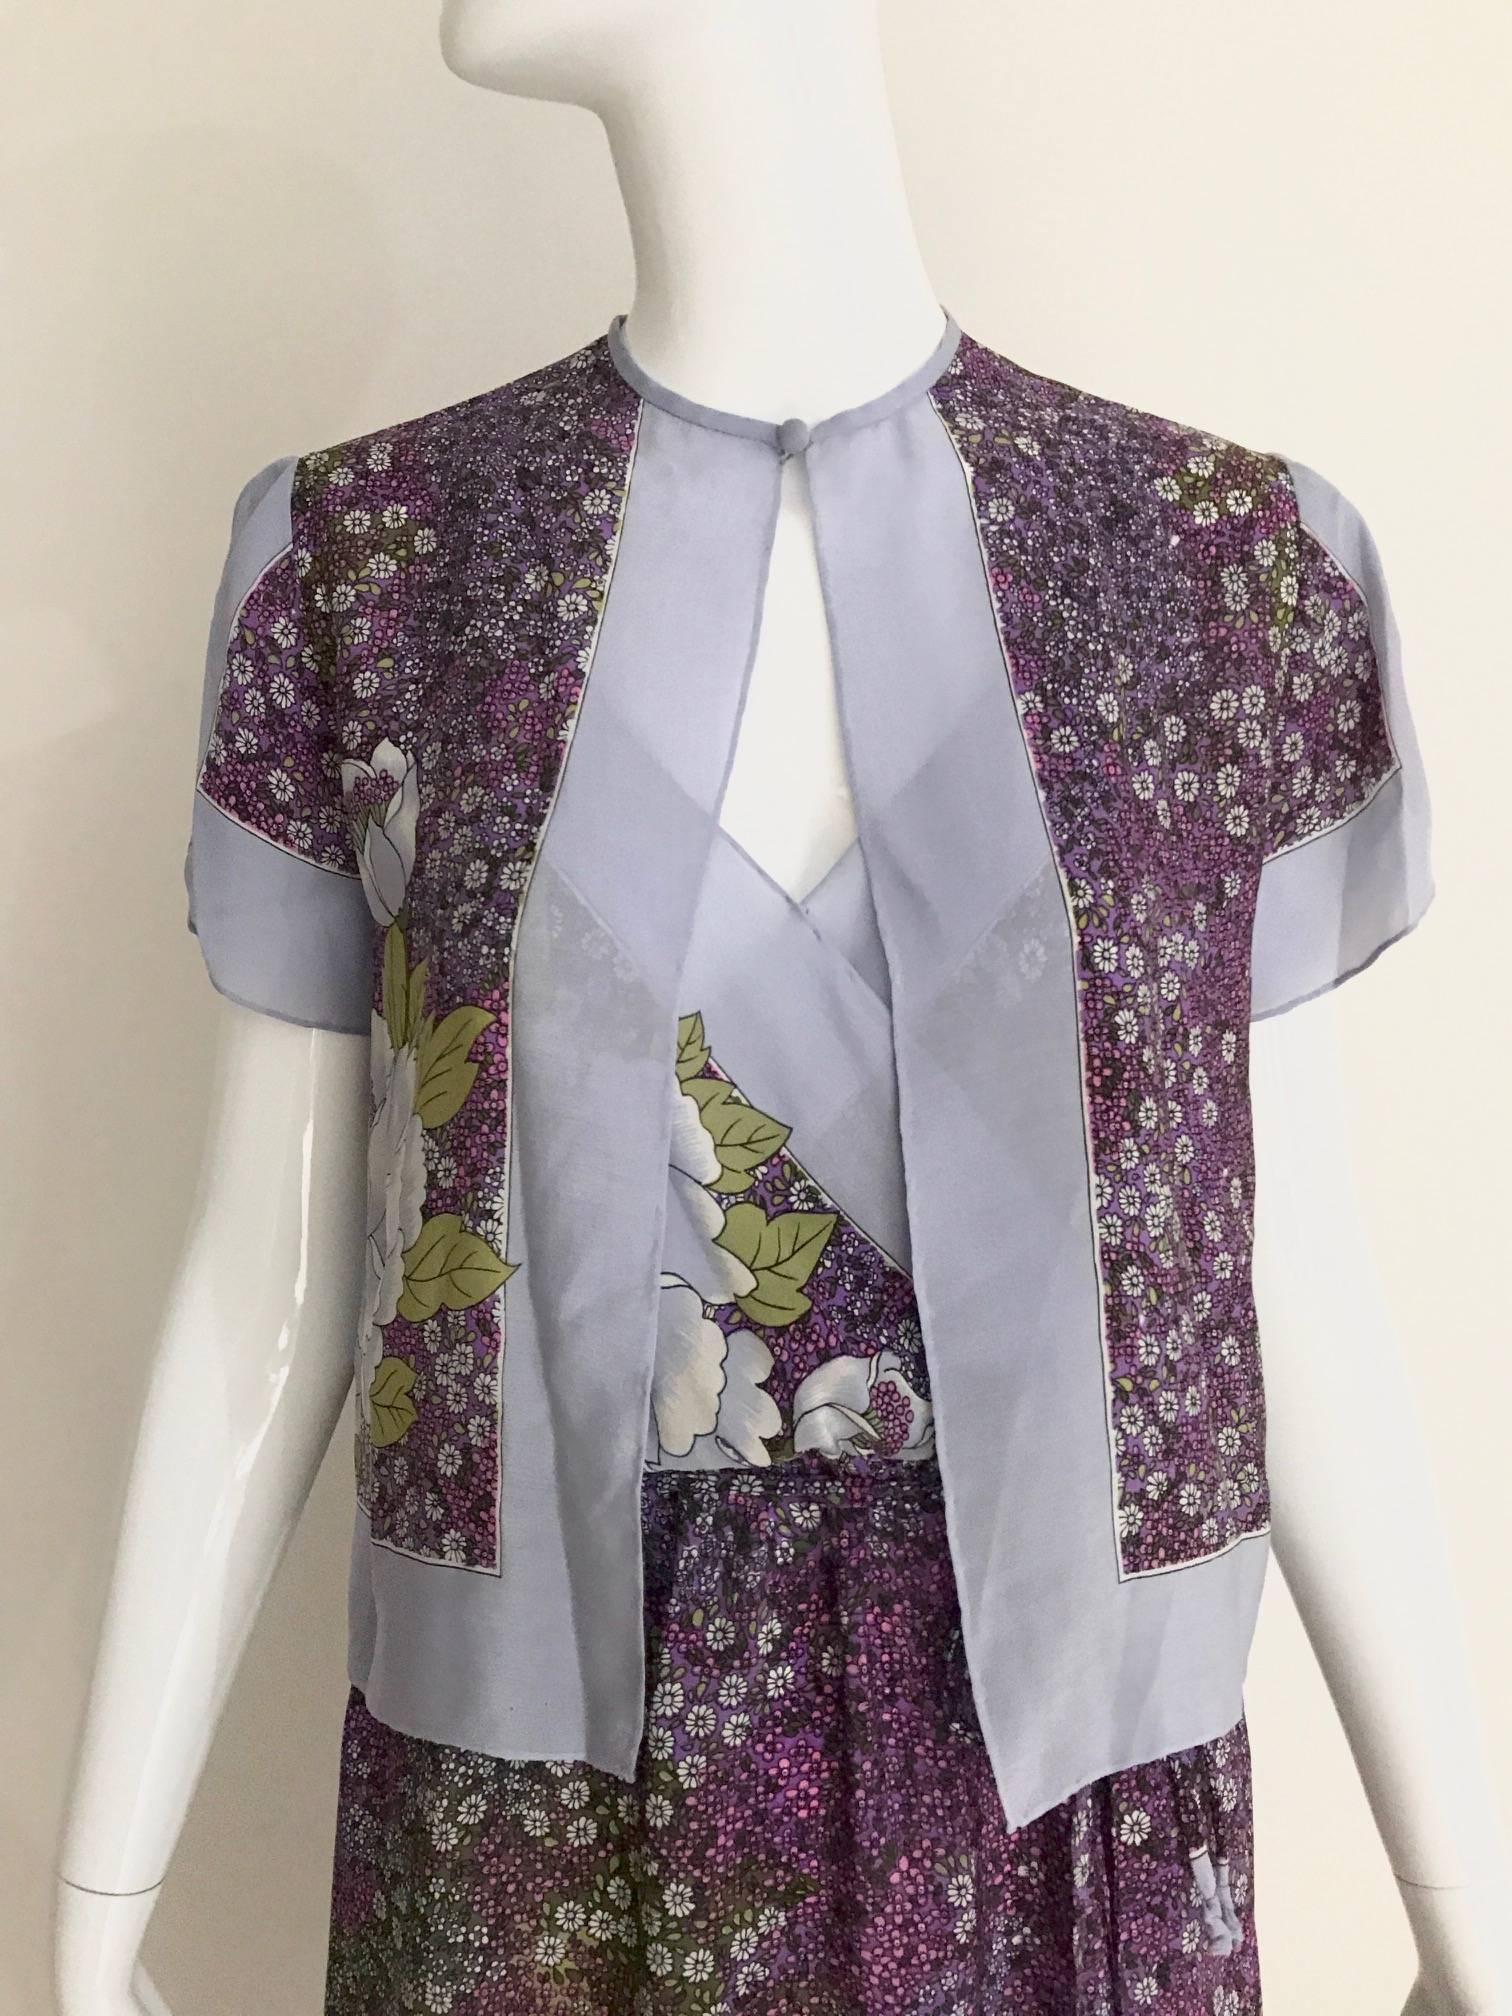 Vintage 1970s 2 pcs ensemble Silk Dress and Cropped jacket in purple and gray floral print spaghetti strap  summer dress ensemble. Dress has elastic waist band and V neck bust. 
Size: 2/4/6 Small - Medium
Bust: 34 inch   / Waist: 24 inch stretches